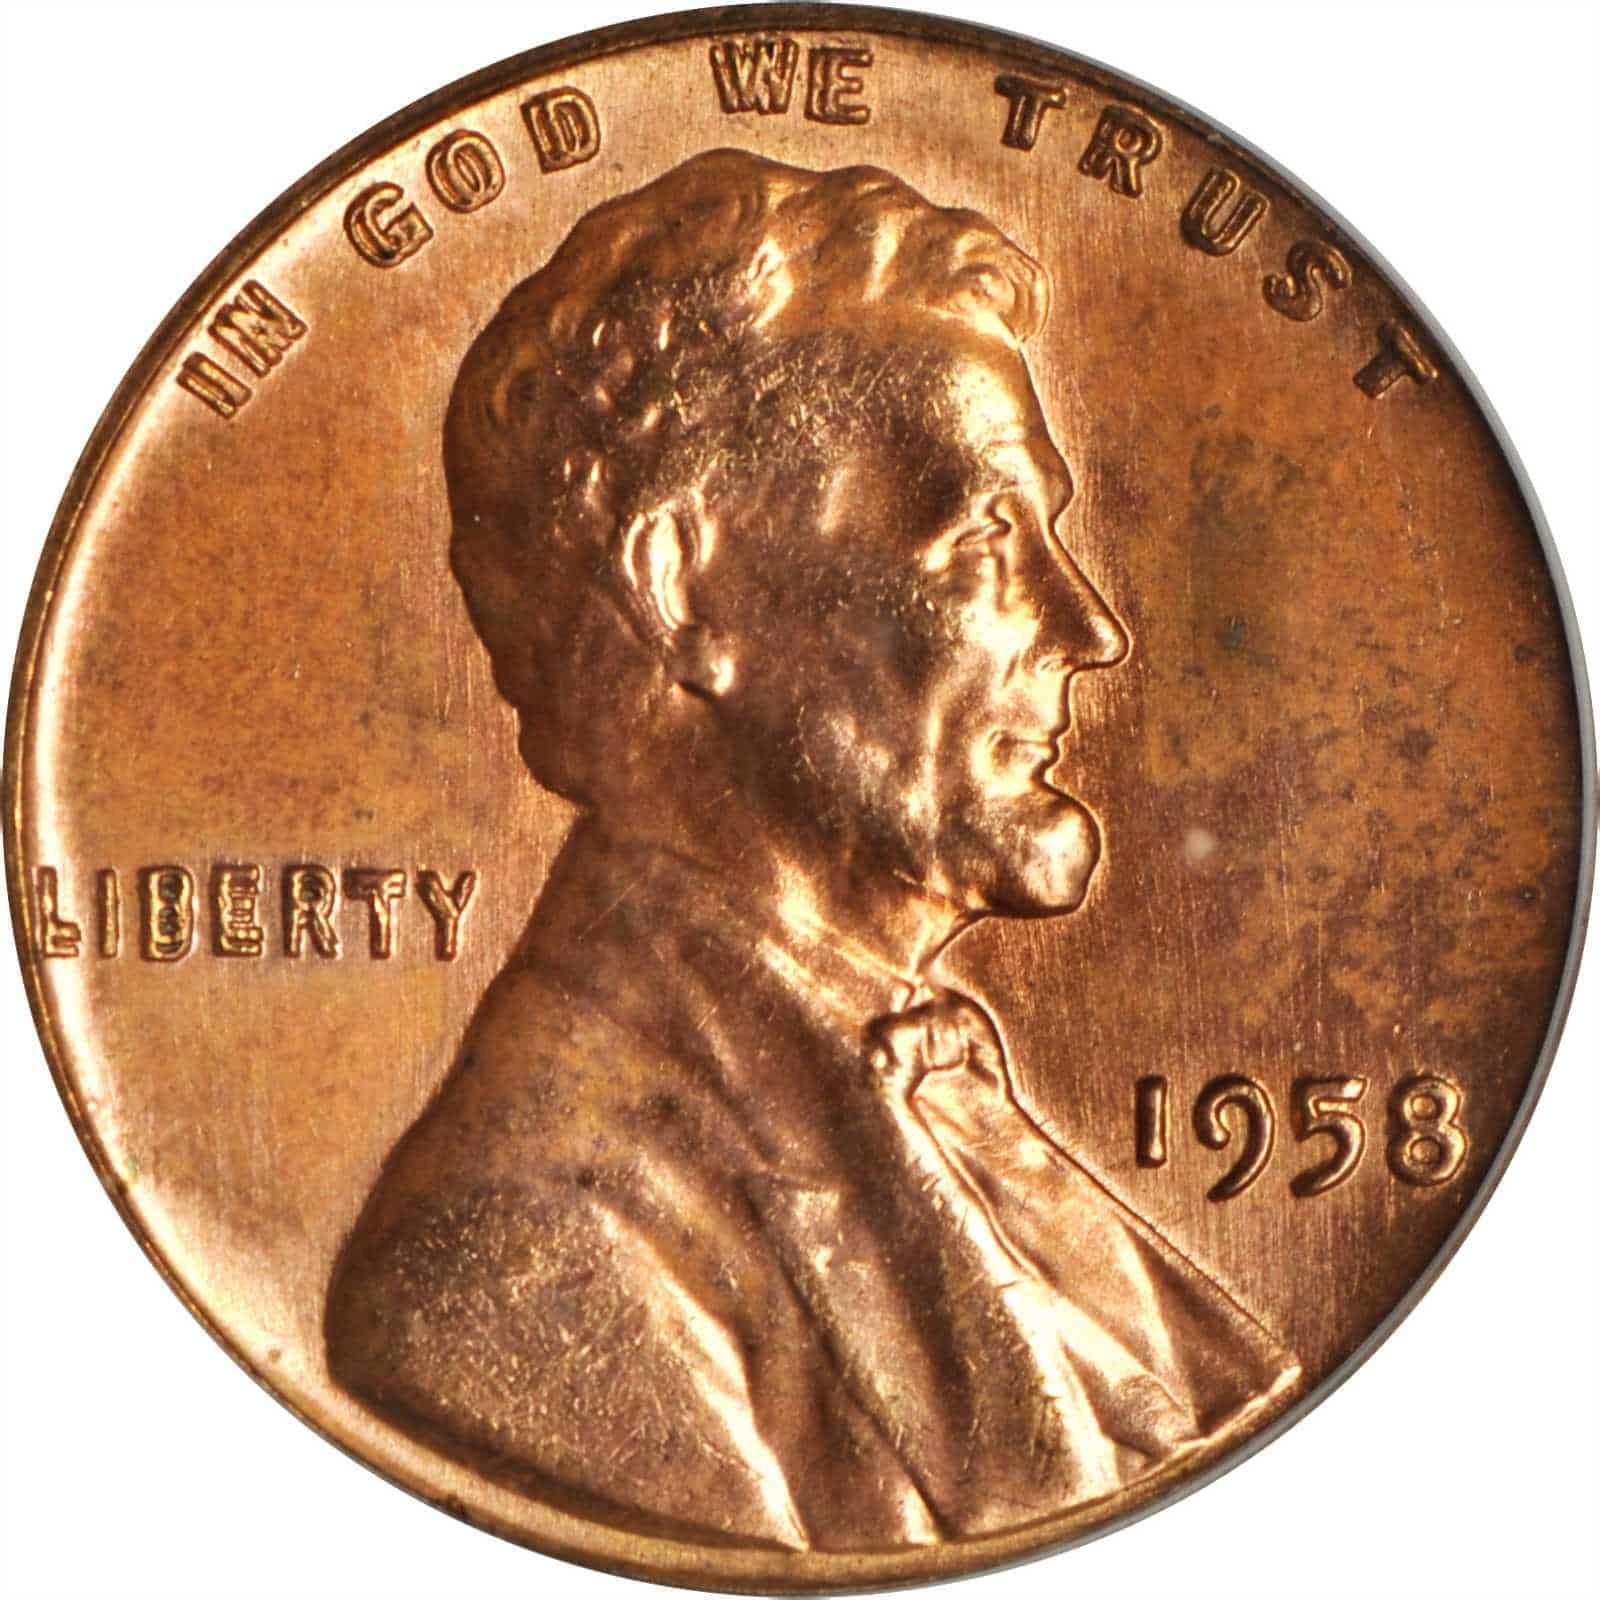 The Obverse of the 1958 Wheat Penny